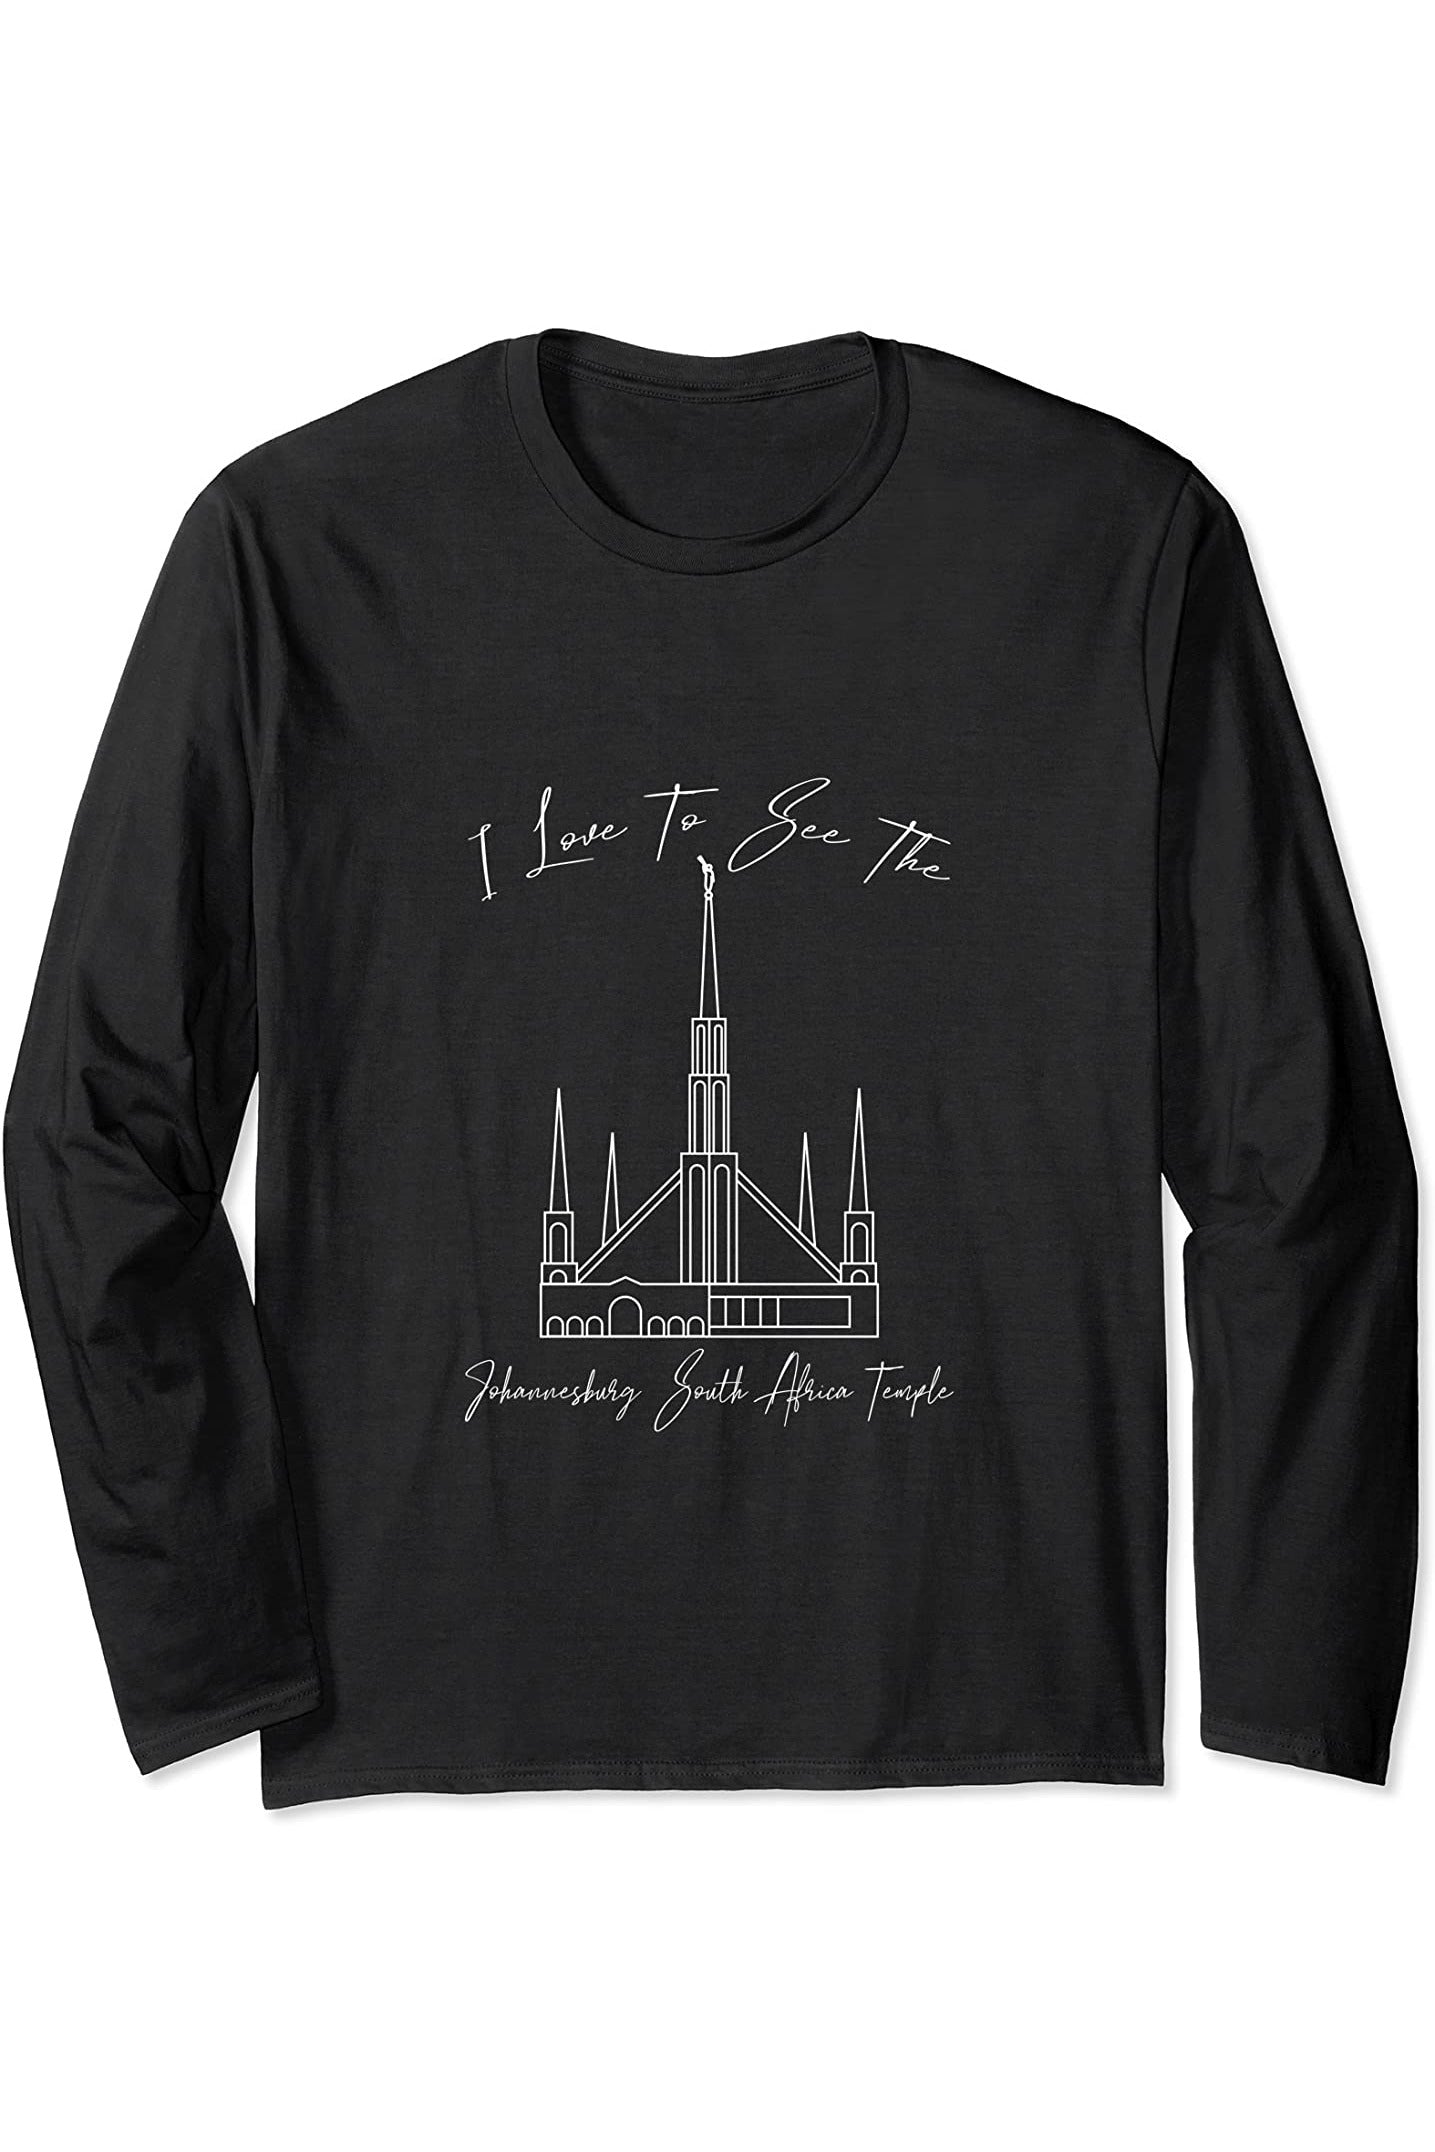 Johannesburg South Africa Temple Long Sleeve T-Shirt - Calligraphy Style (English) US